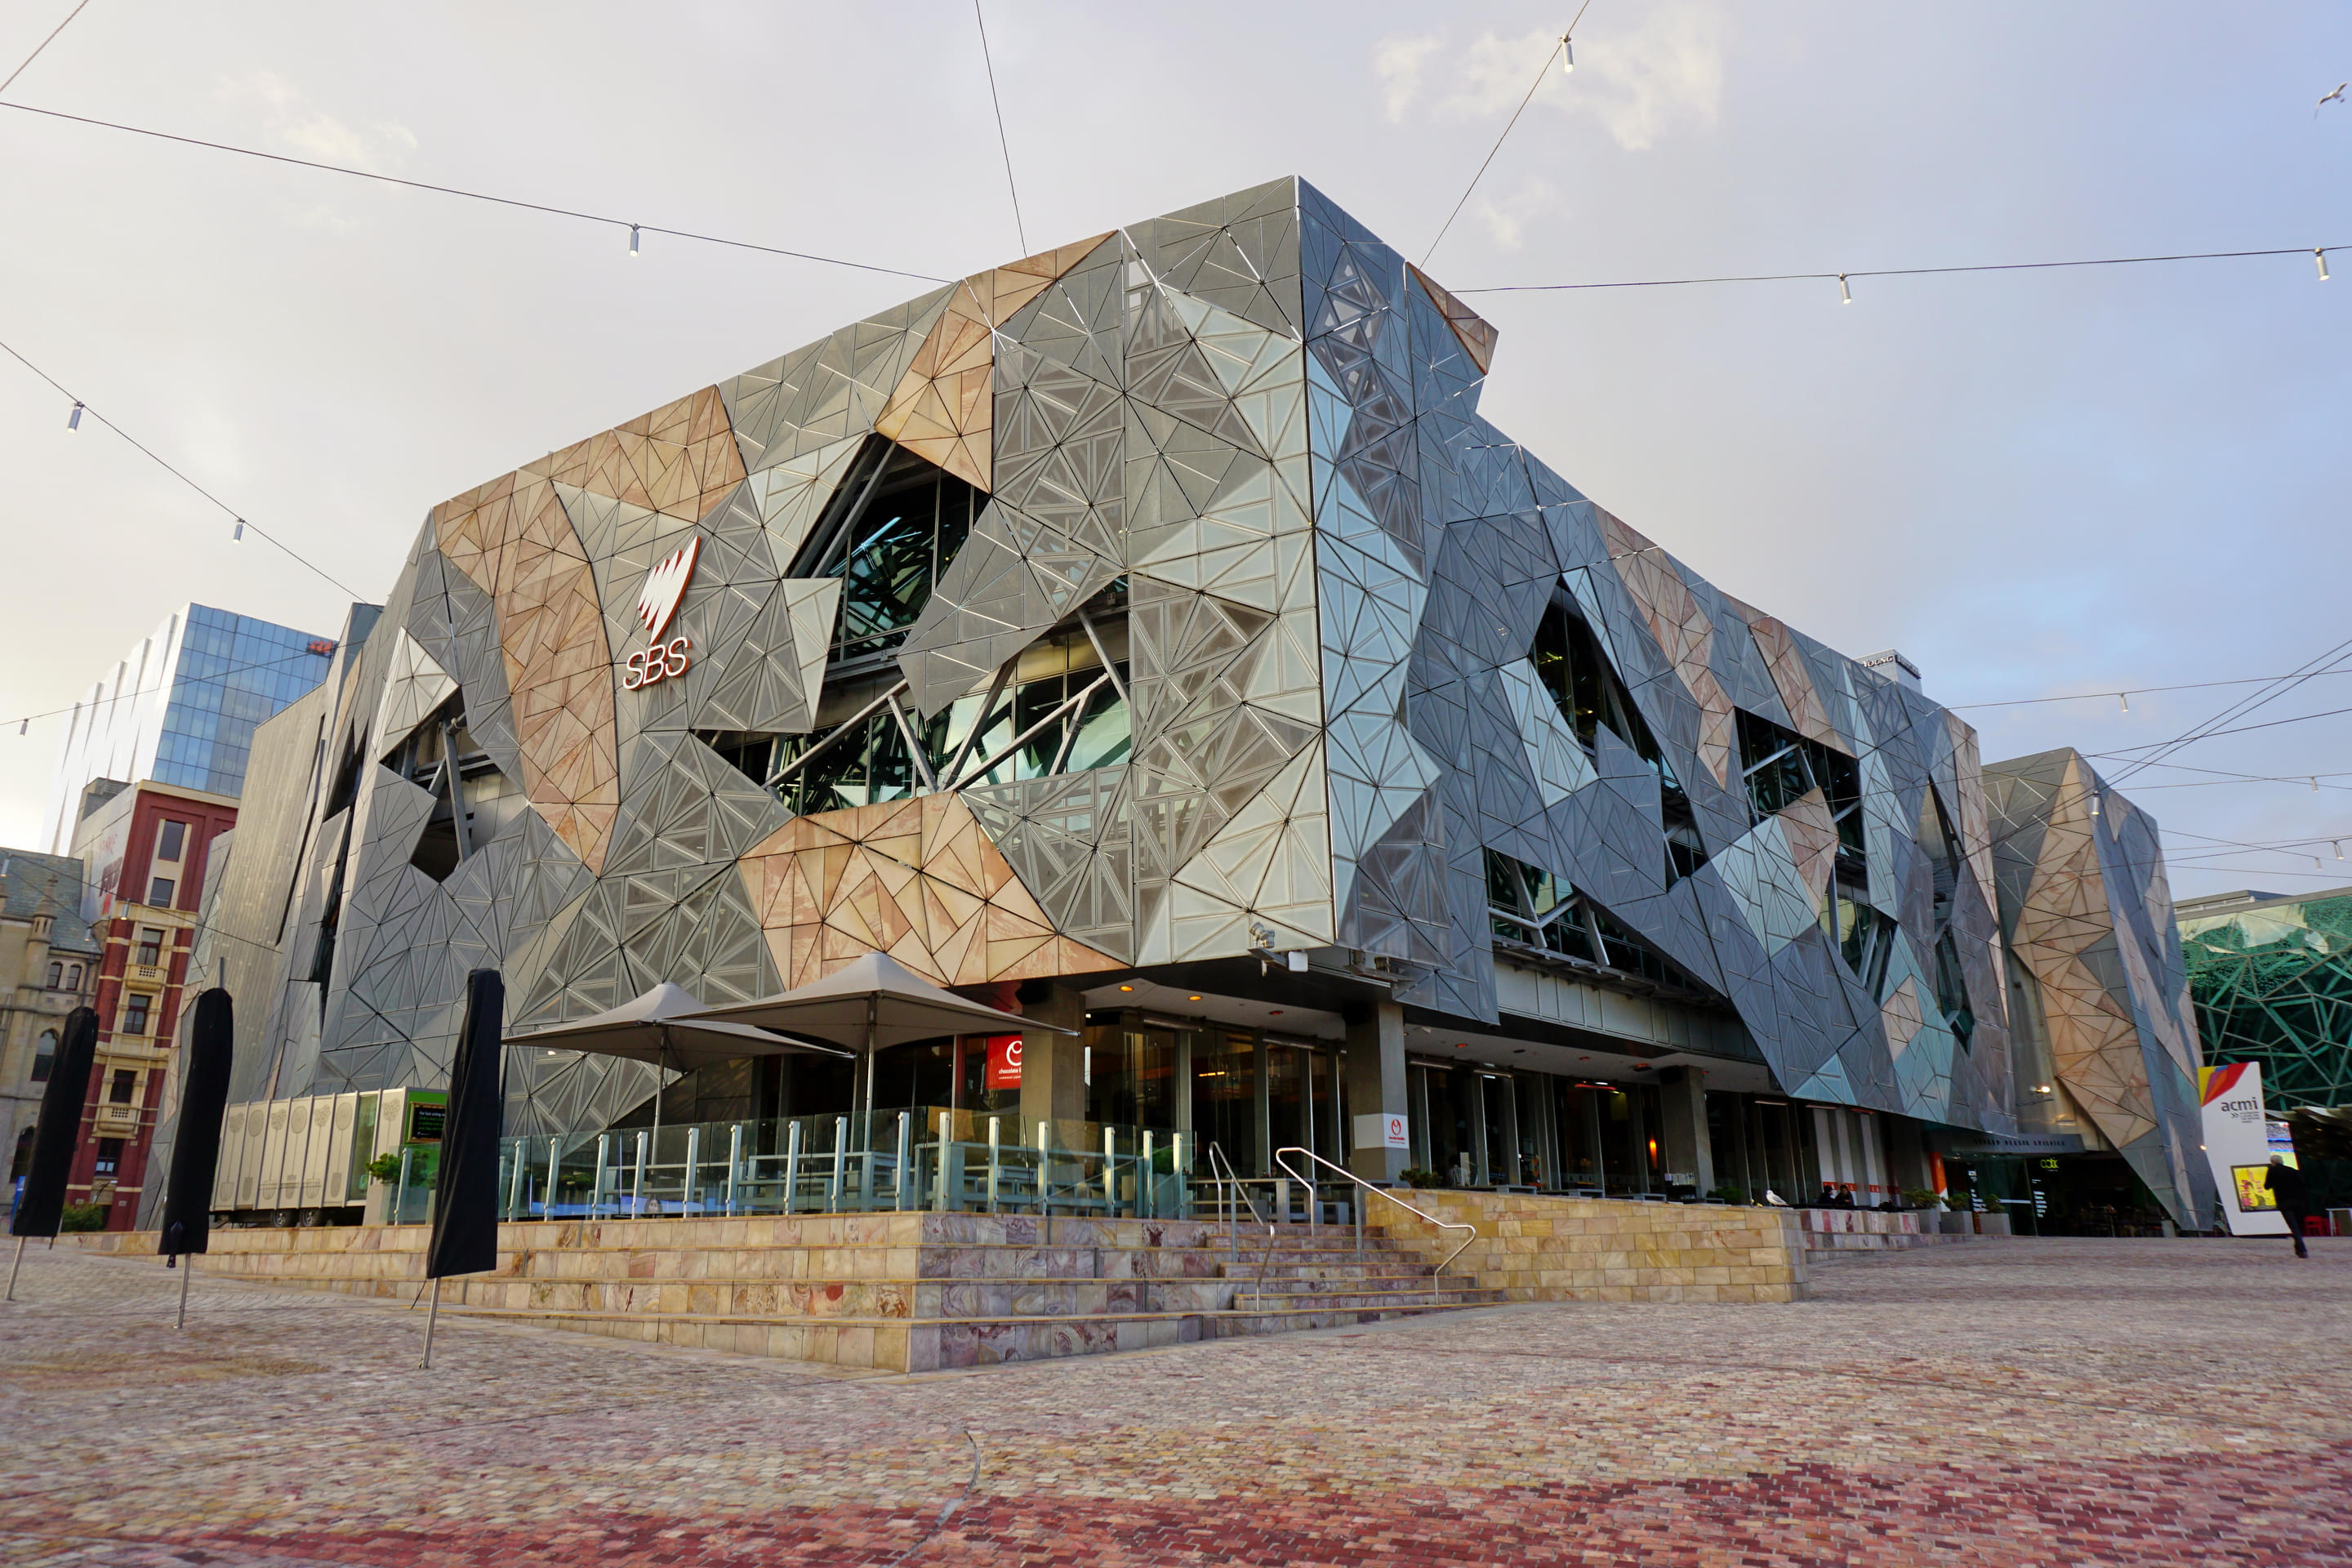 Federation Square Overview